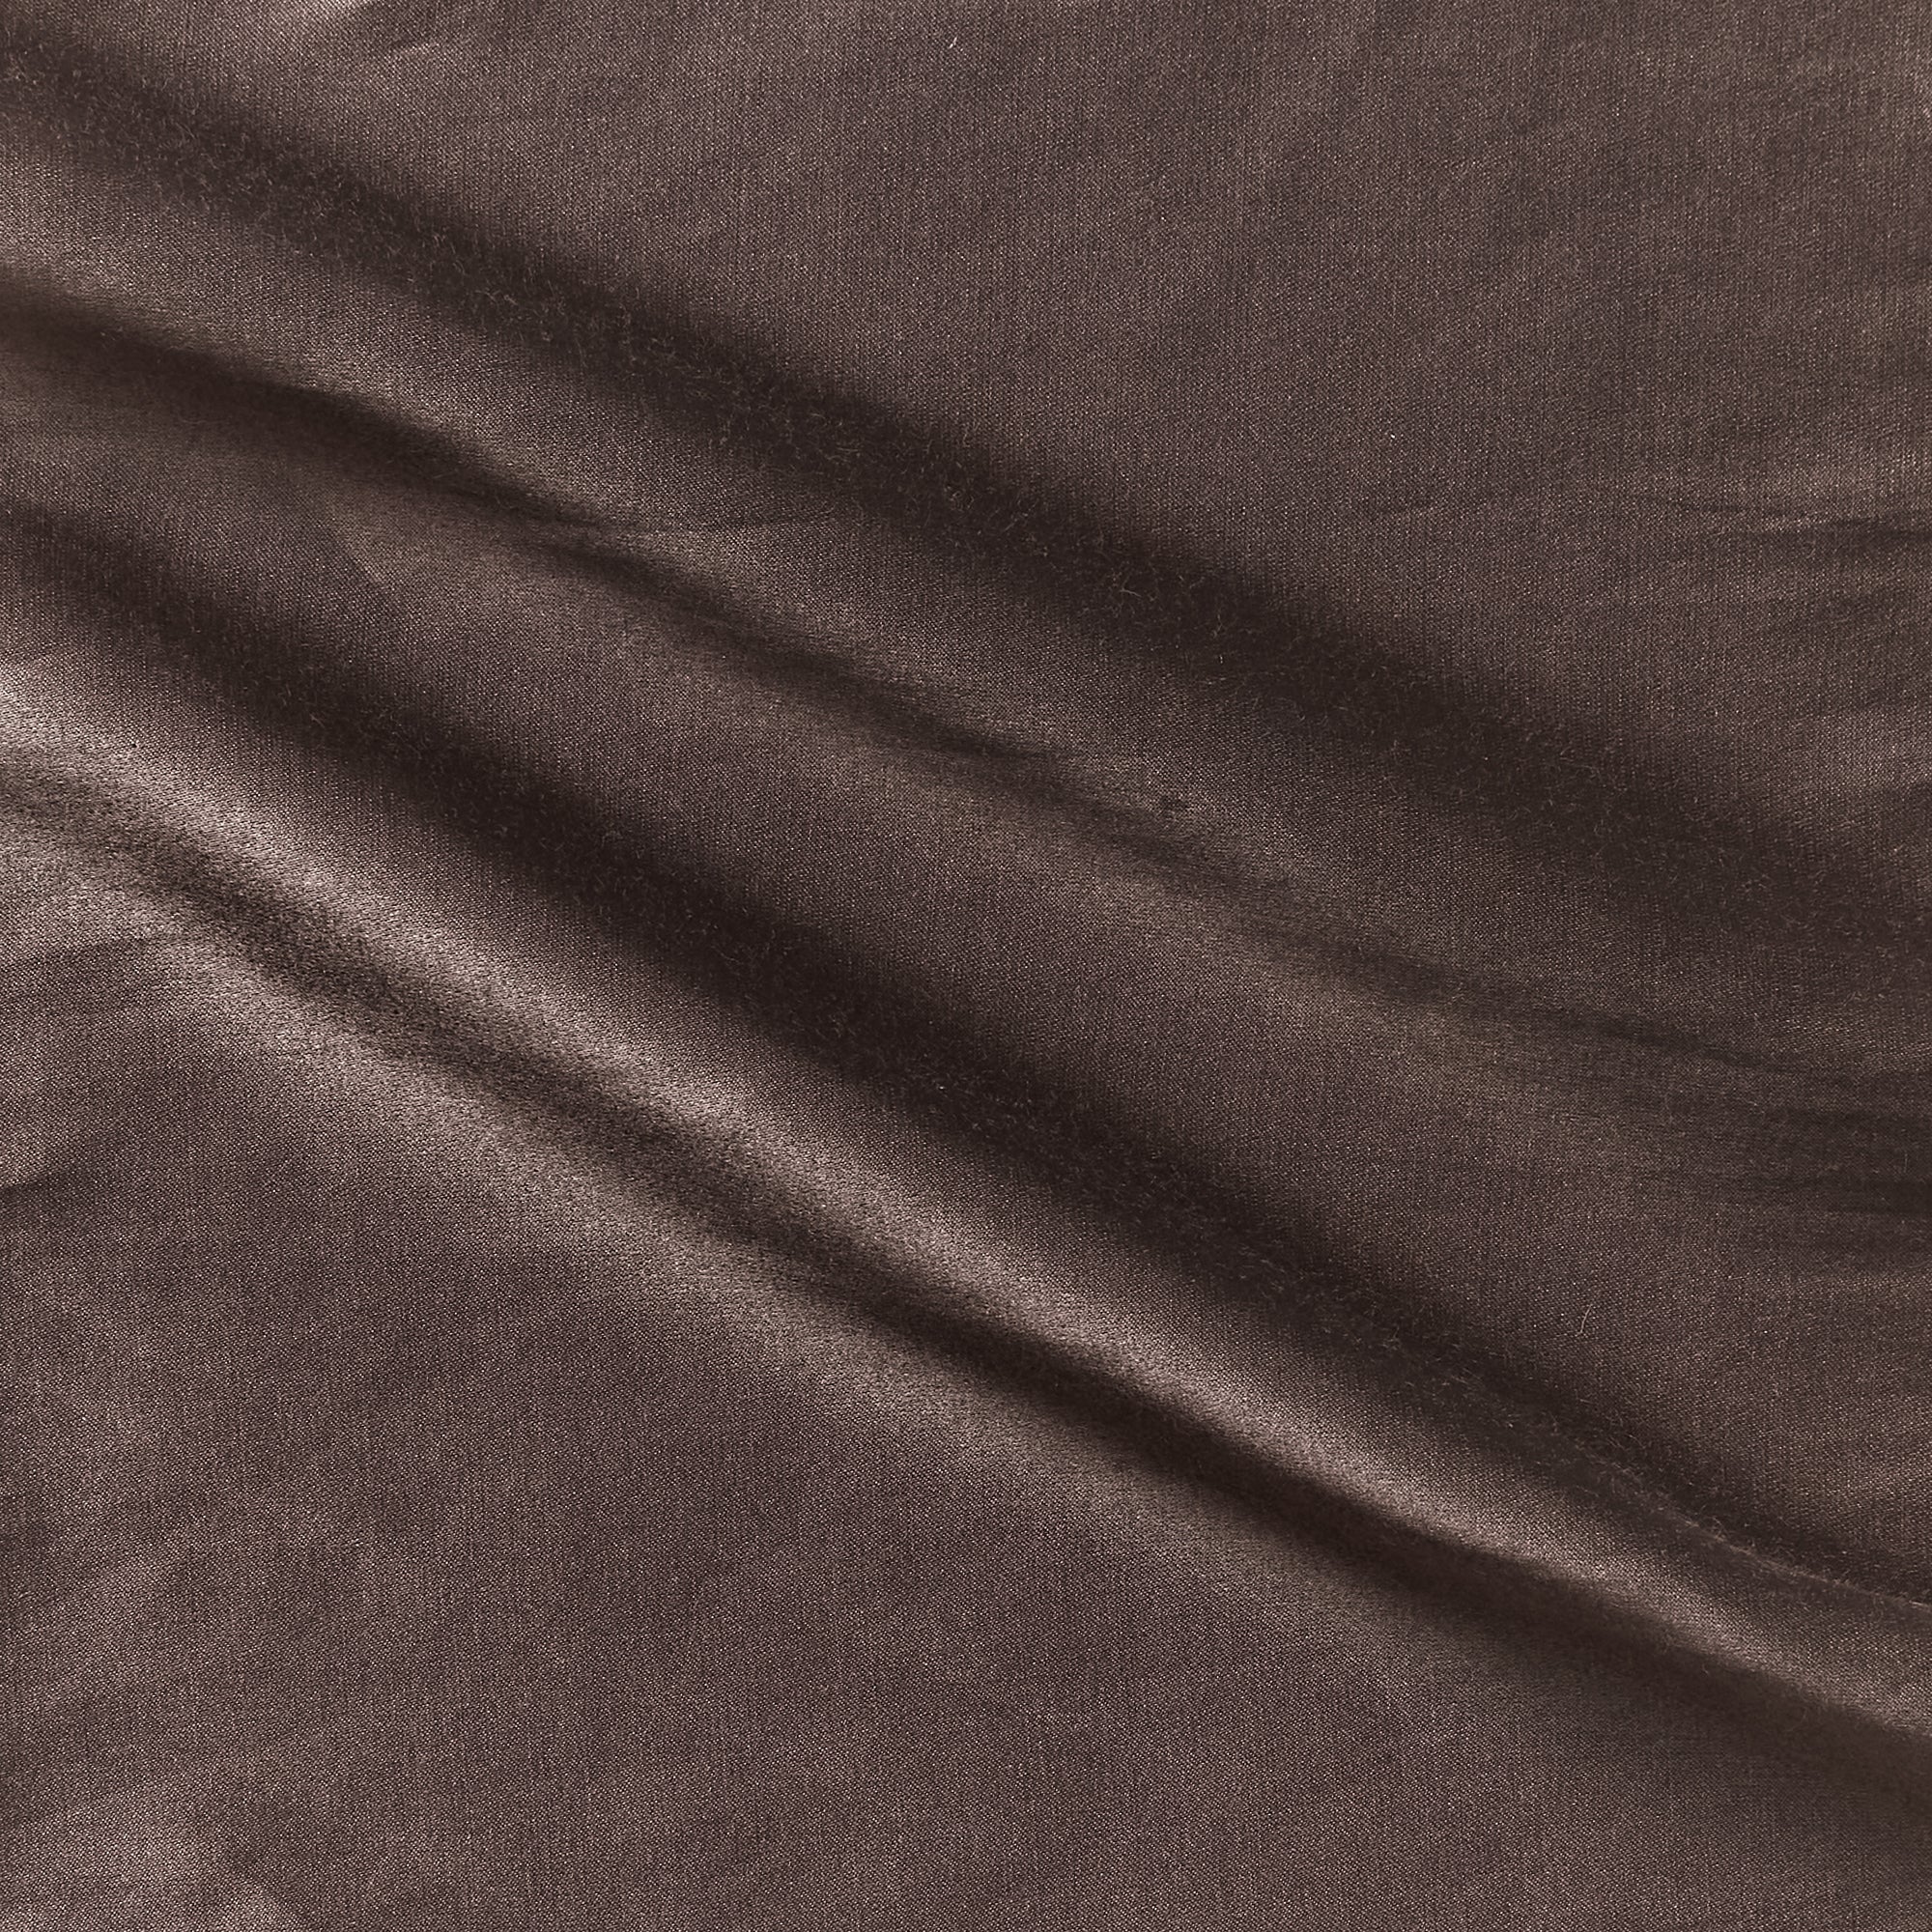 bella displaying the mocha color version with lightweight silk satin as a silk and cotton blend featuring fluid drape